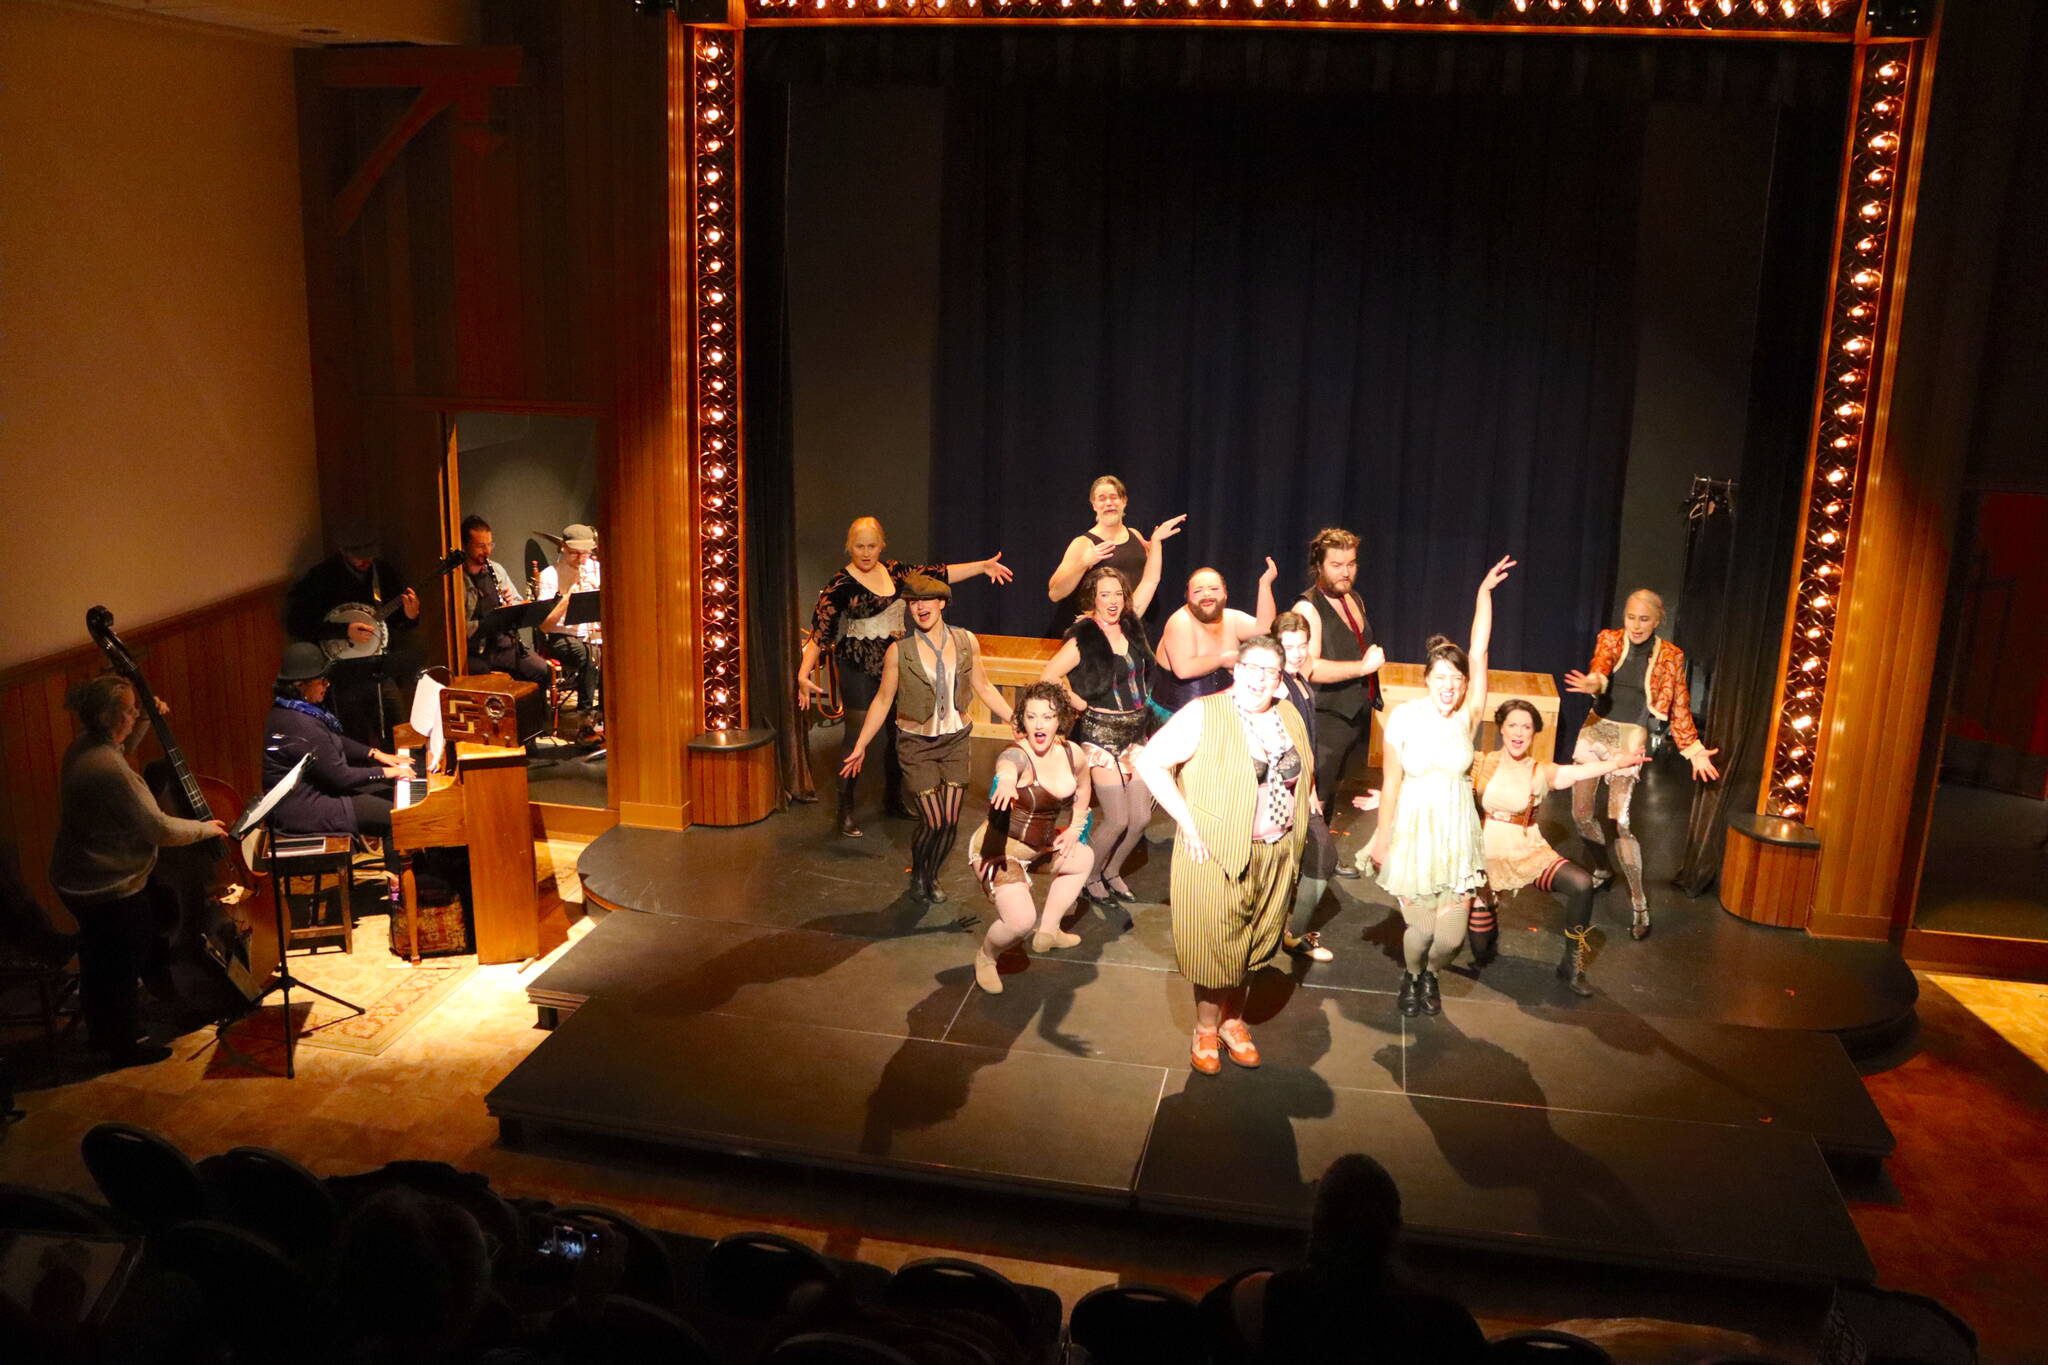 Meredith Jordan/ Juneau Empire
Theatre in the Rough, staging “Cabaret” with a cast of 17 and a large band, fills the stage at McPhetres Hall during a rehearsal Monday night. The show opens Friday, Nov. 17, and runs through Dec. 10.